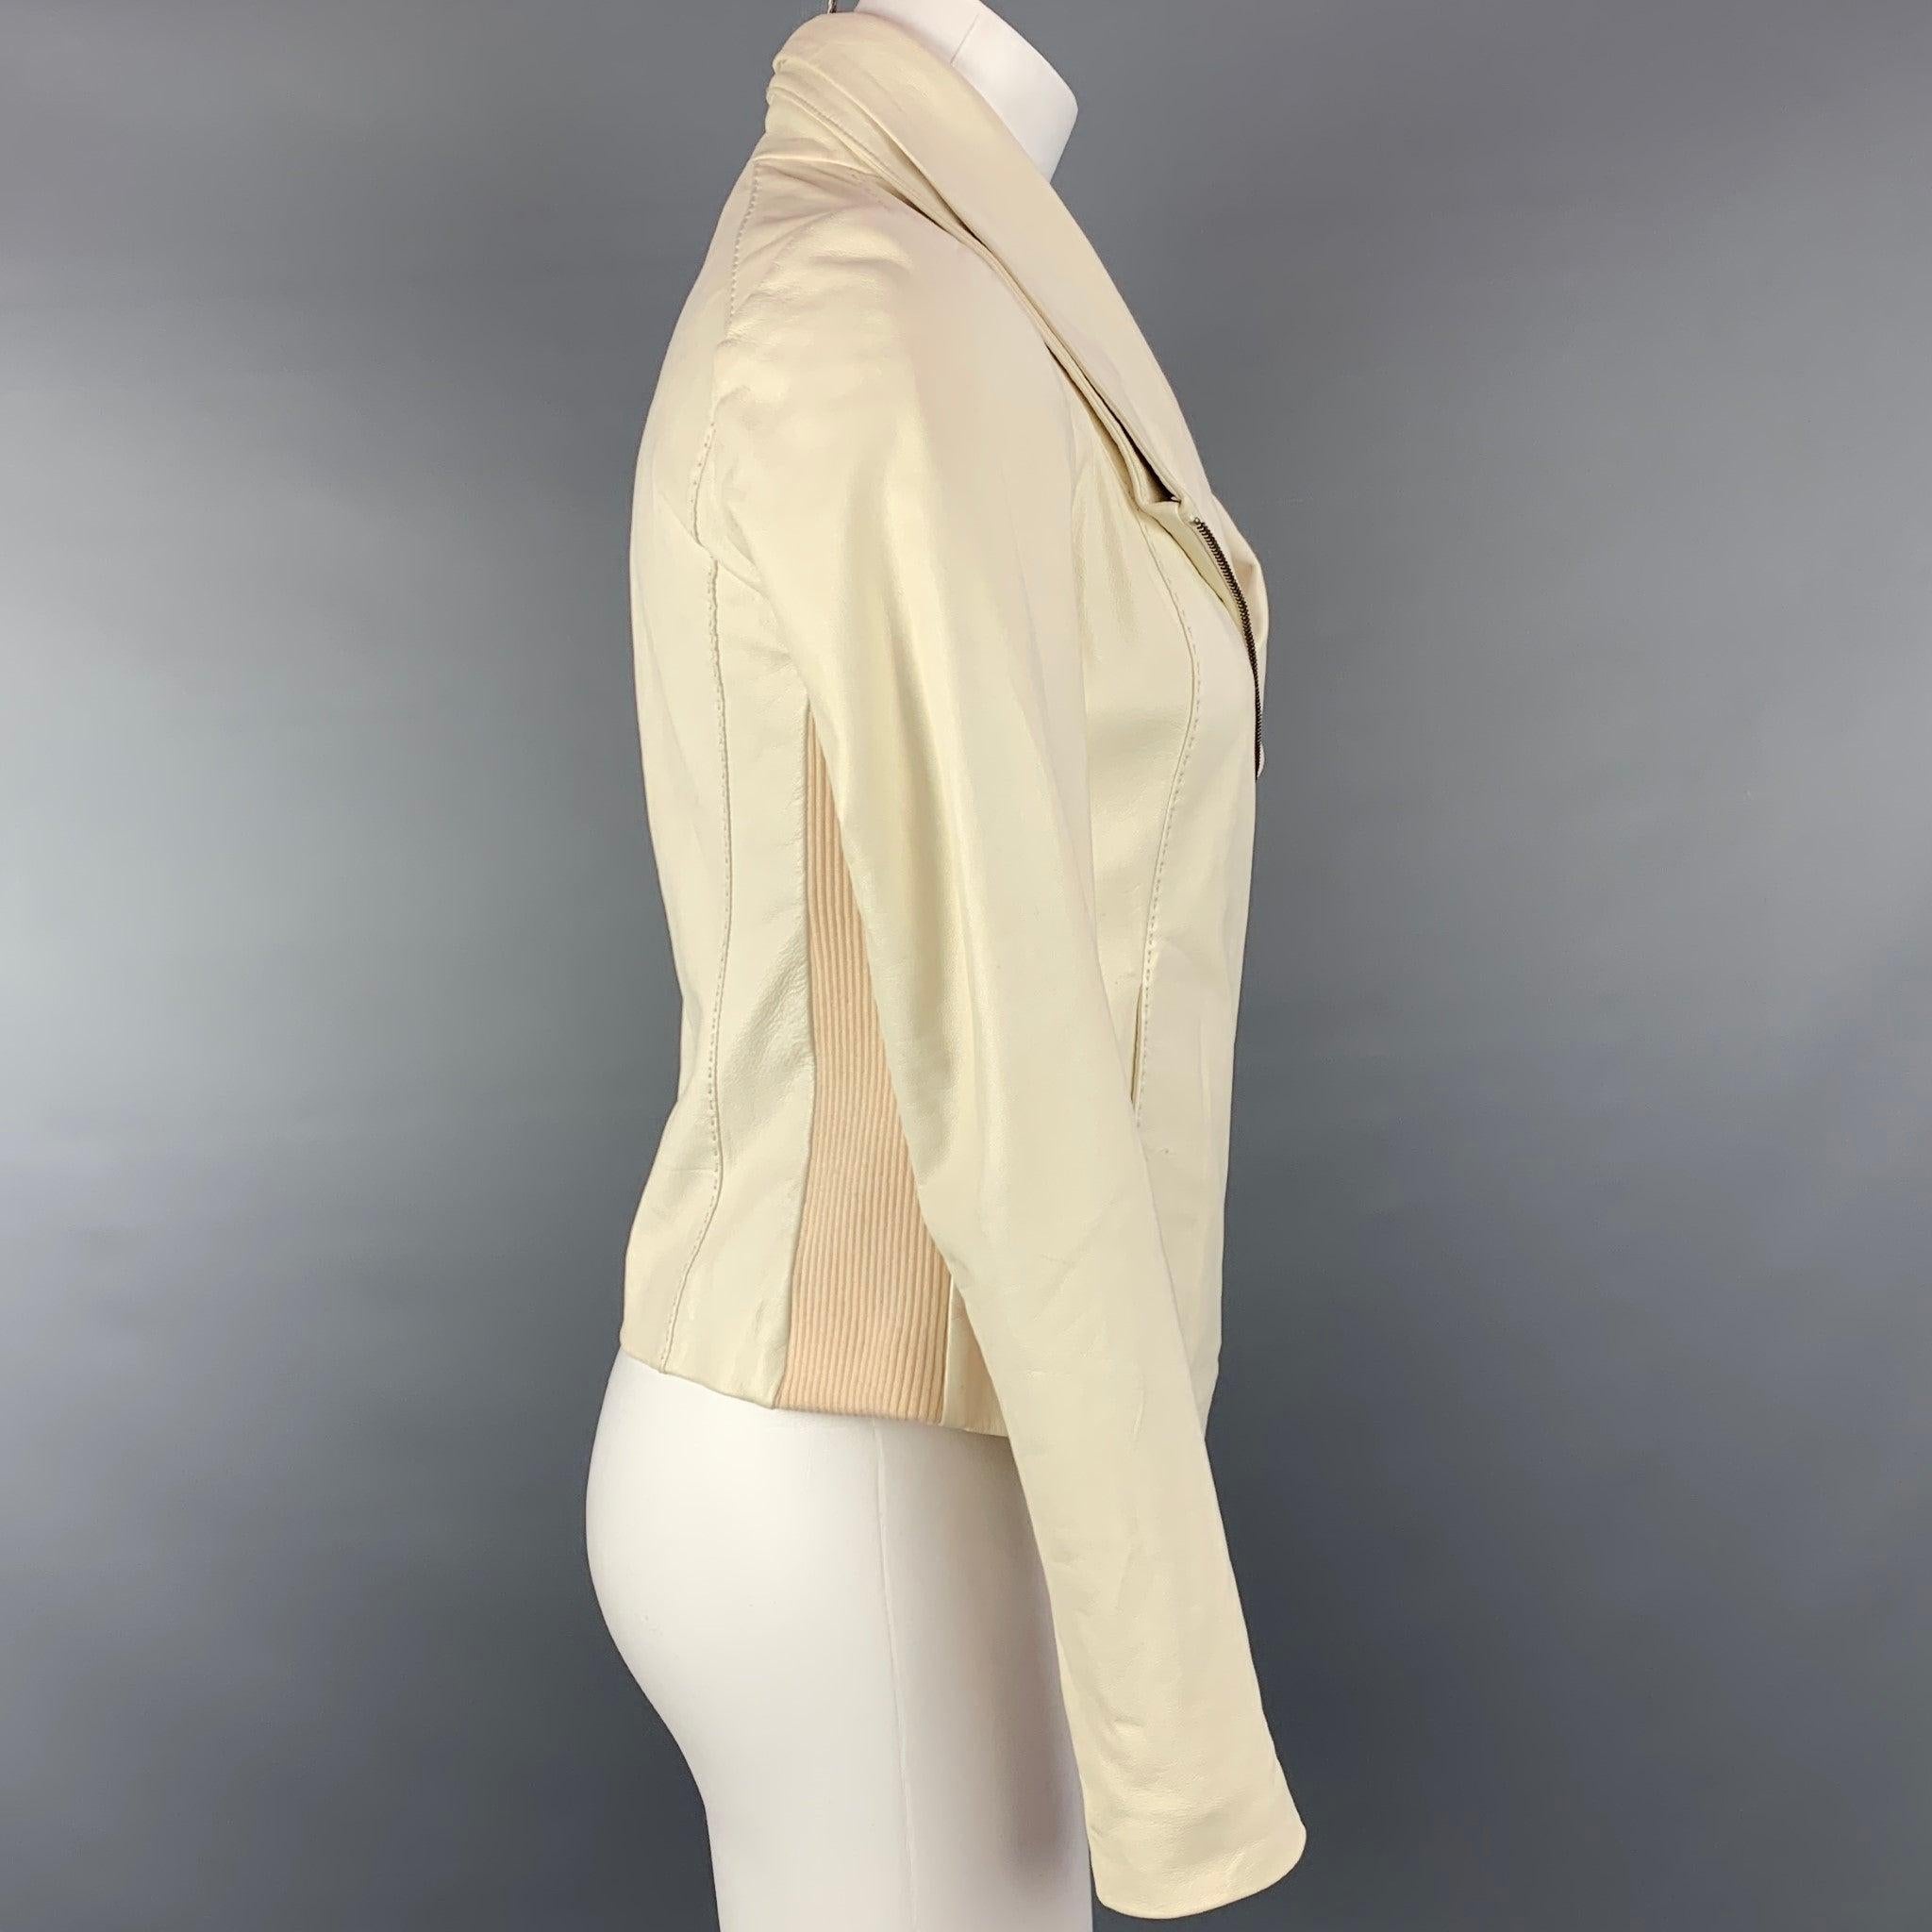 VINCE Size XS Cream Cotton Leather Motorcycle Jacket In Good Condition For Sale In San Francisco, CA